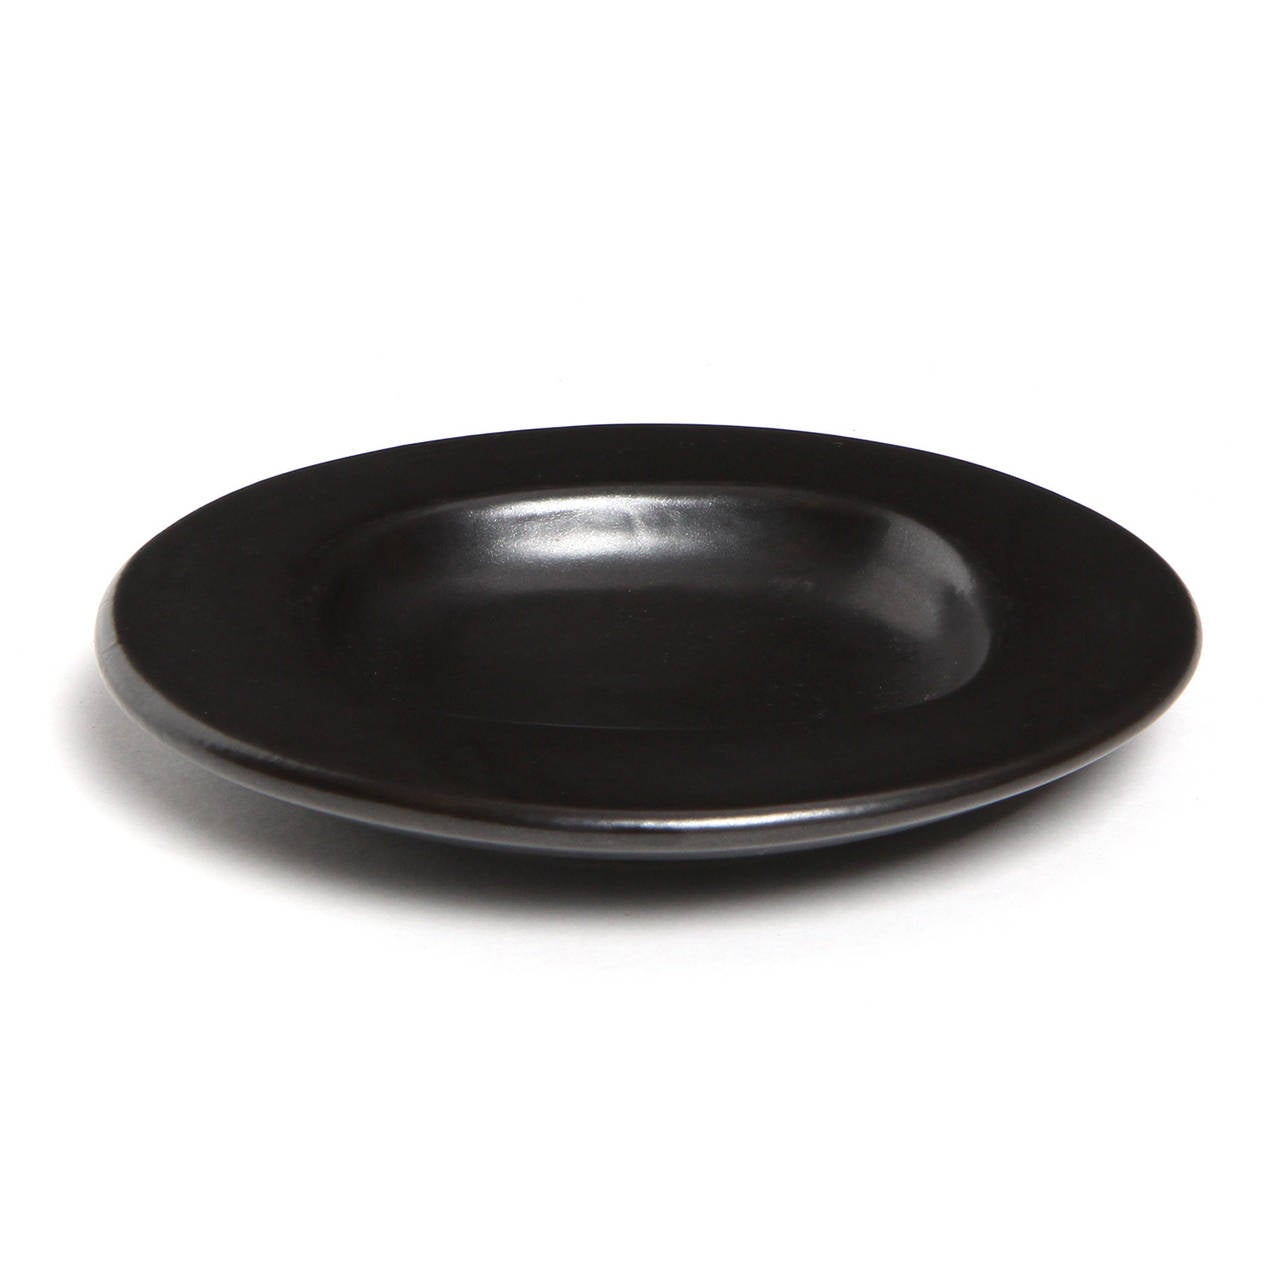 A finely rendered and substantial shallow bowl having a softened organic form and a rich and deep matte black glaze.